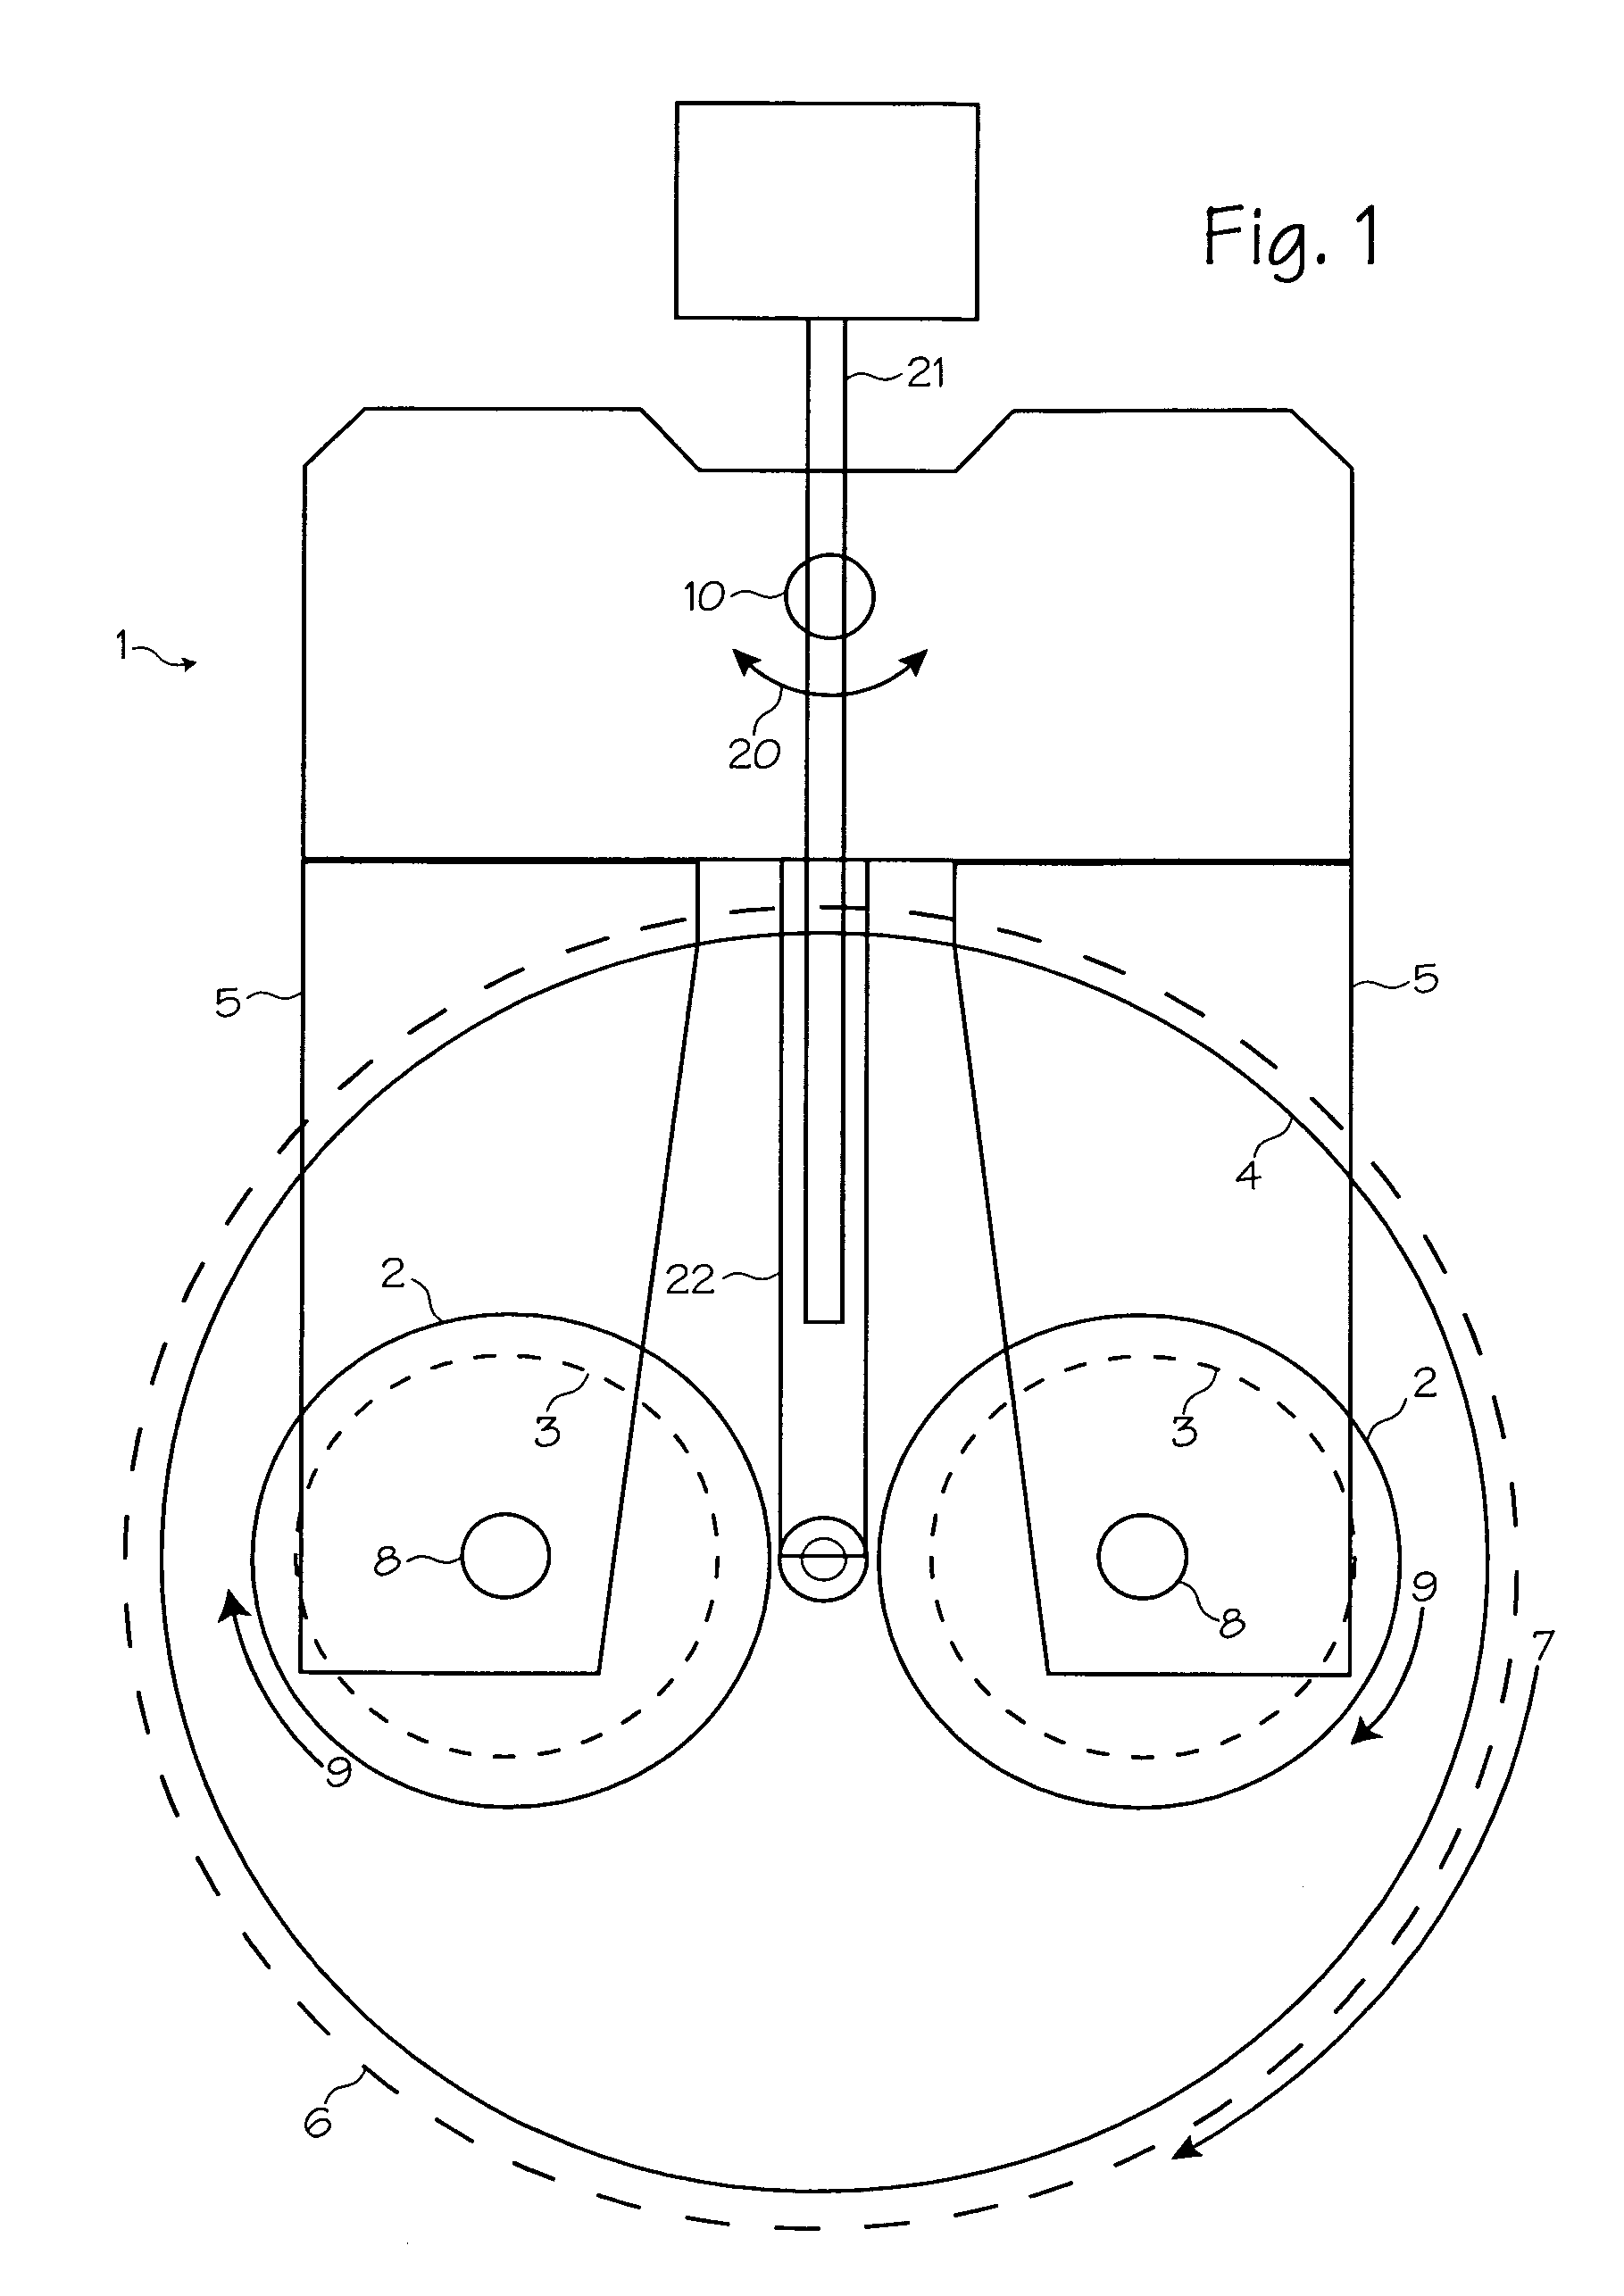 Wafer carrier with pressurized membrane and retaining ring actuator